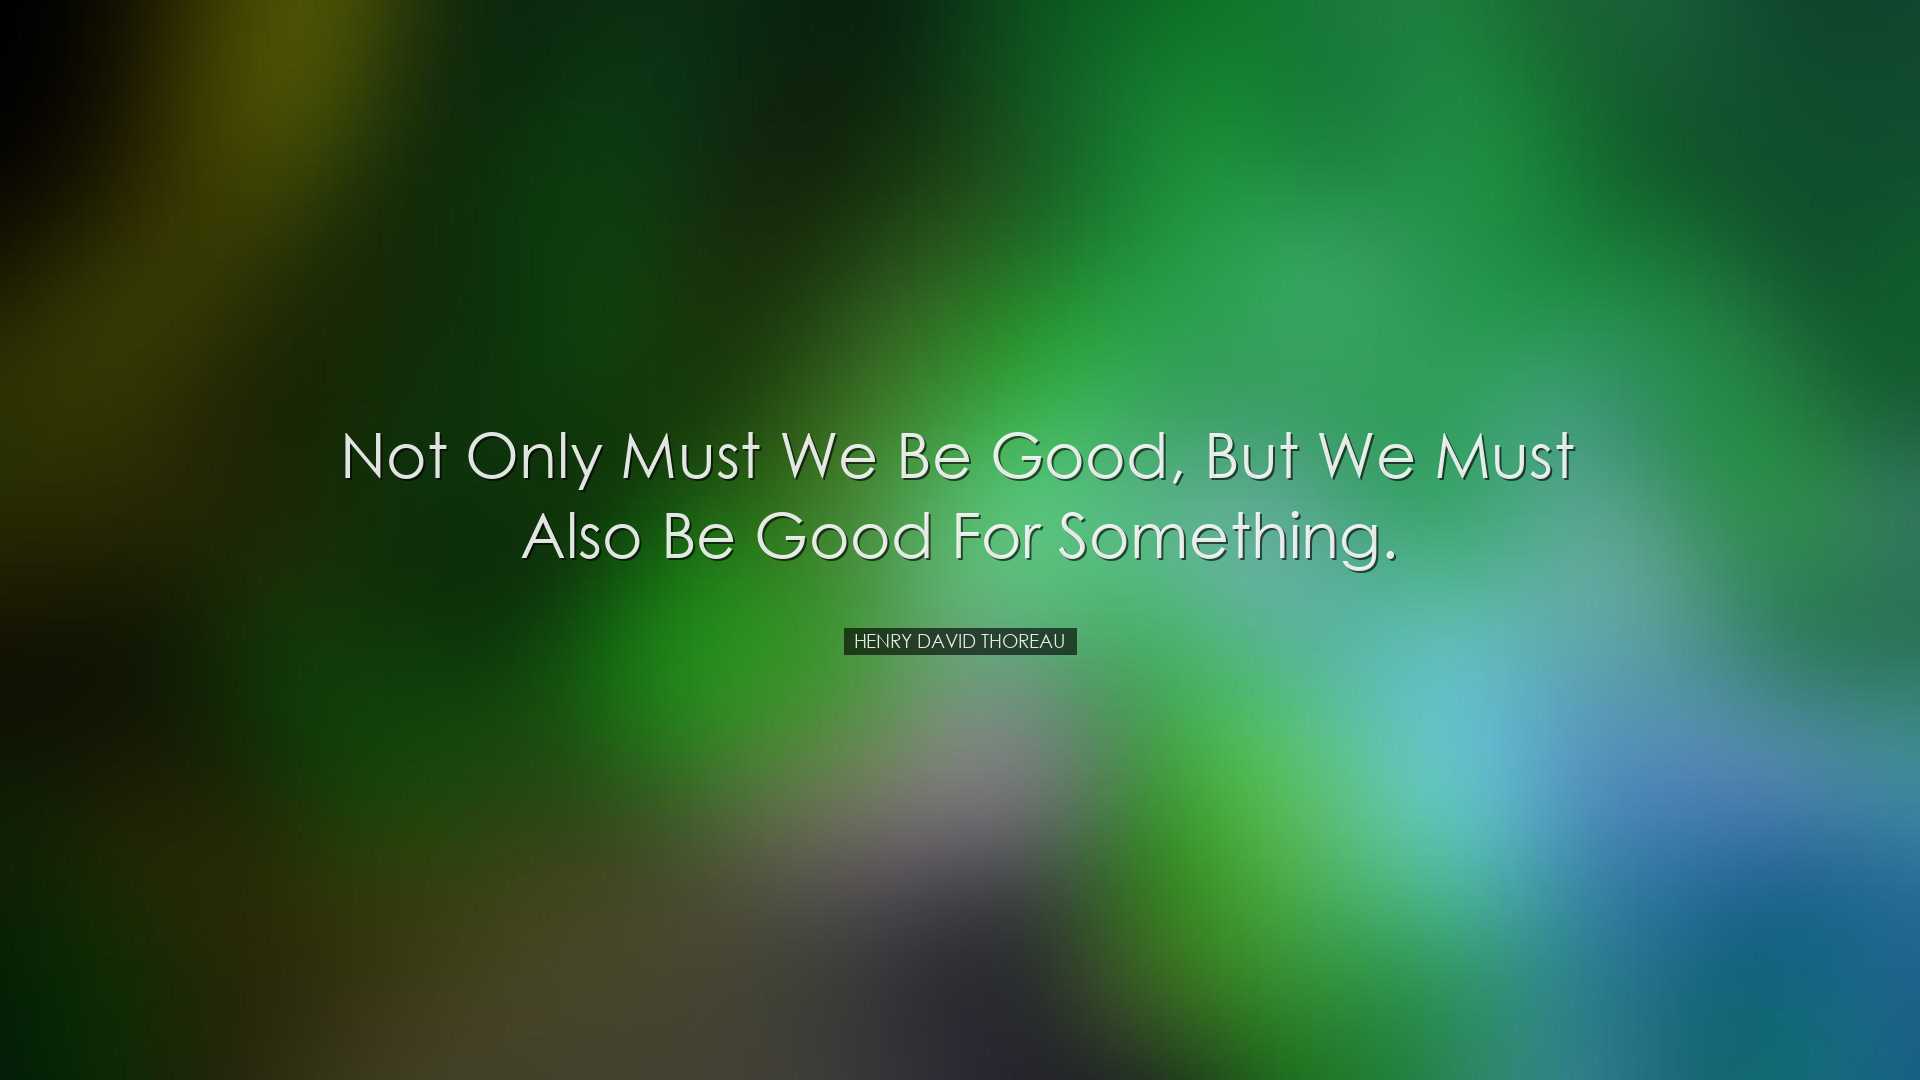 Not only must we be good, but we must also be good for something.